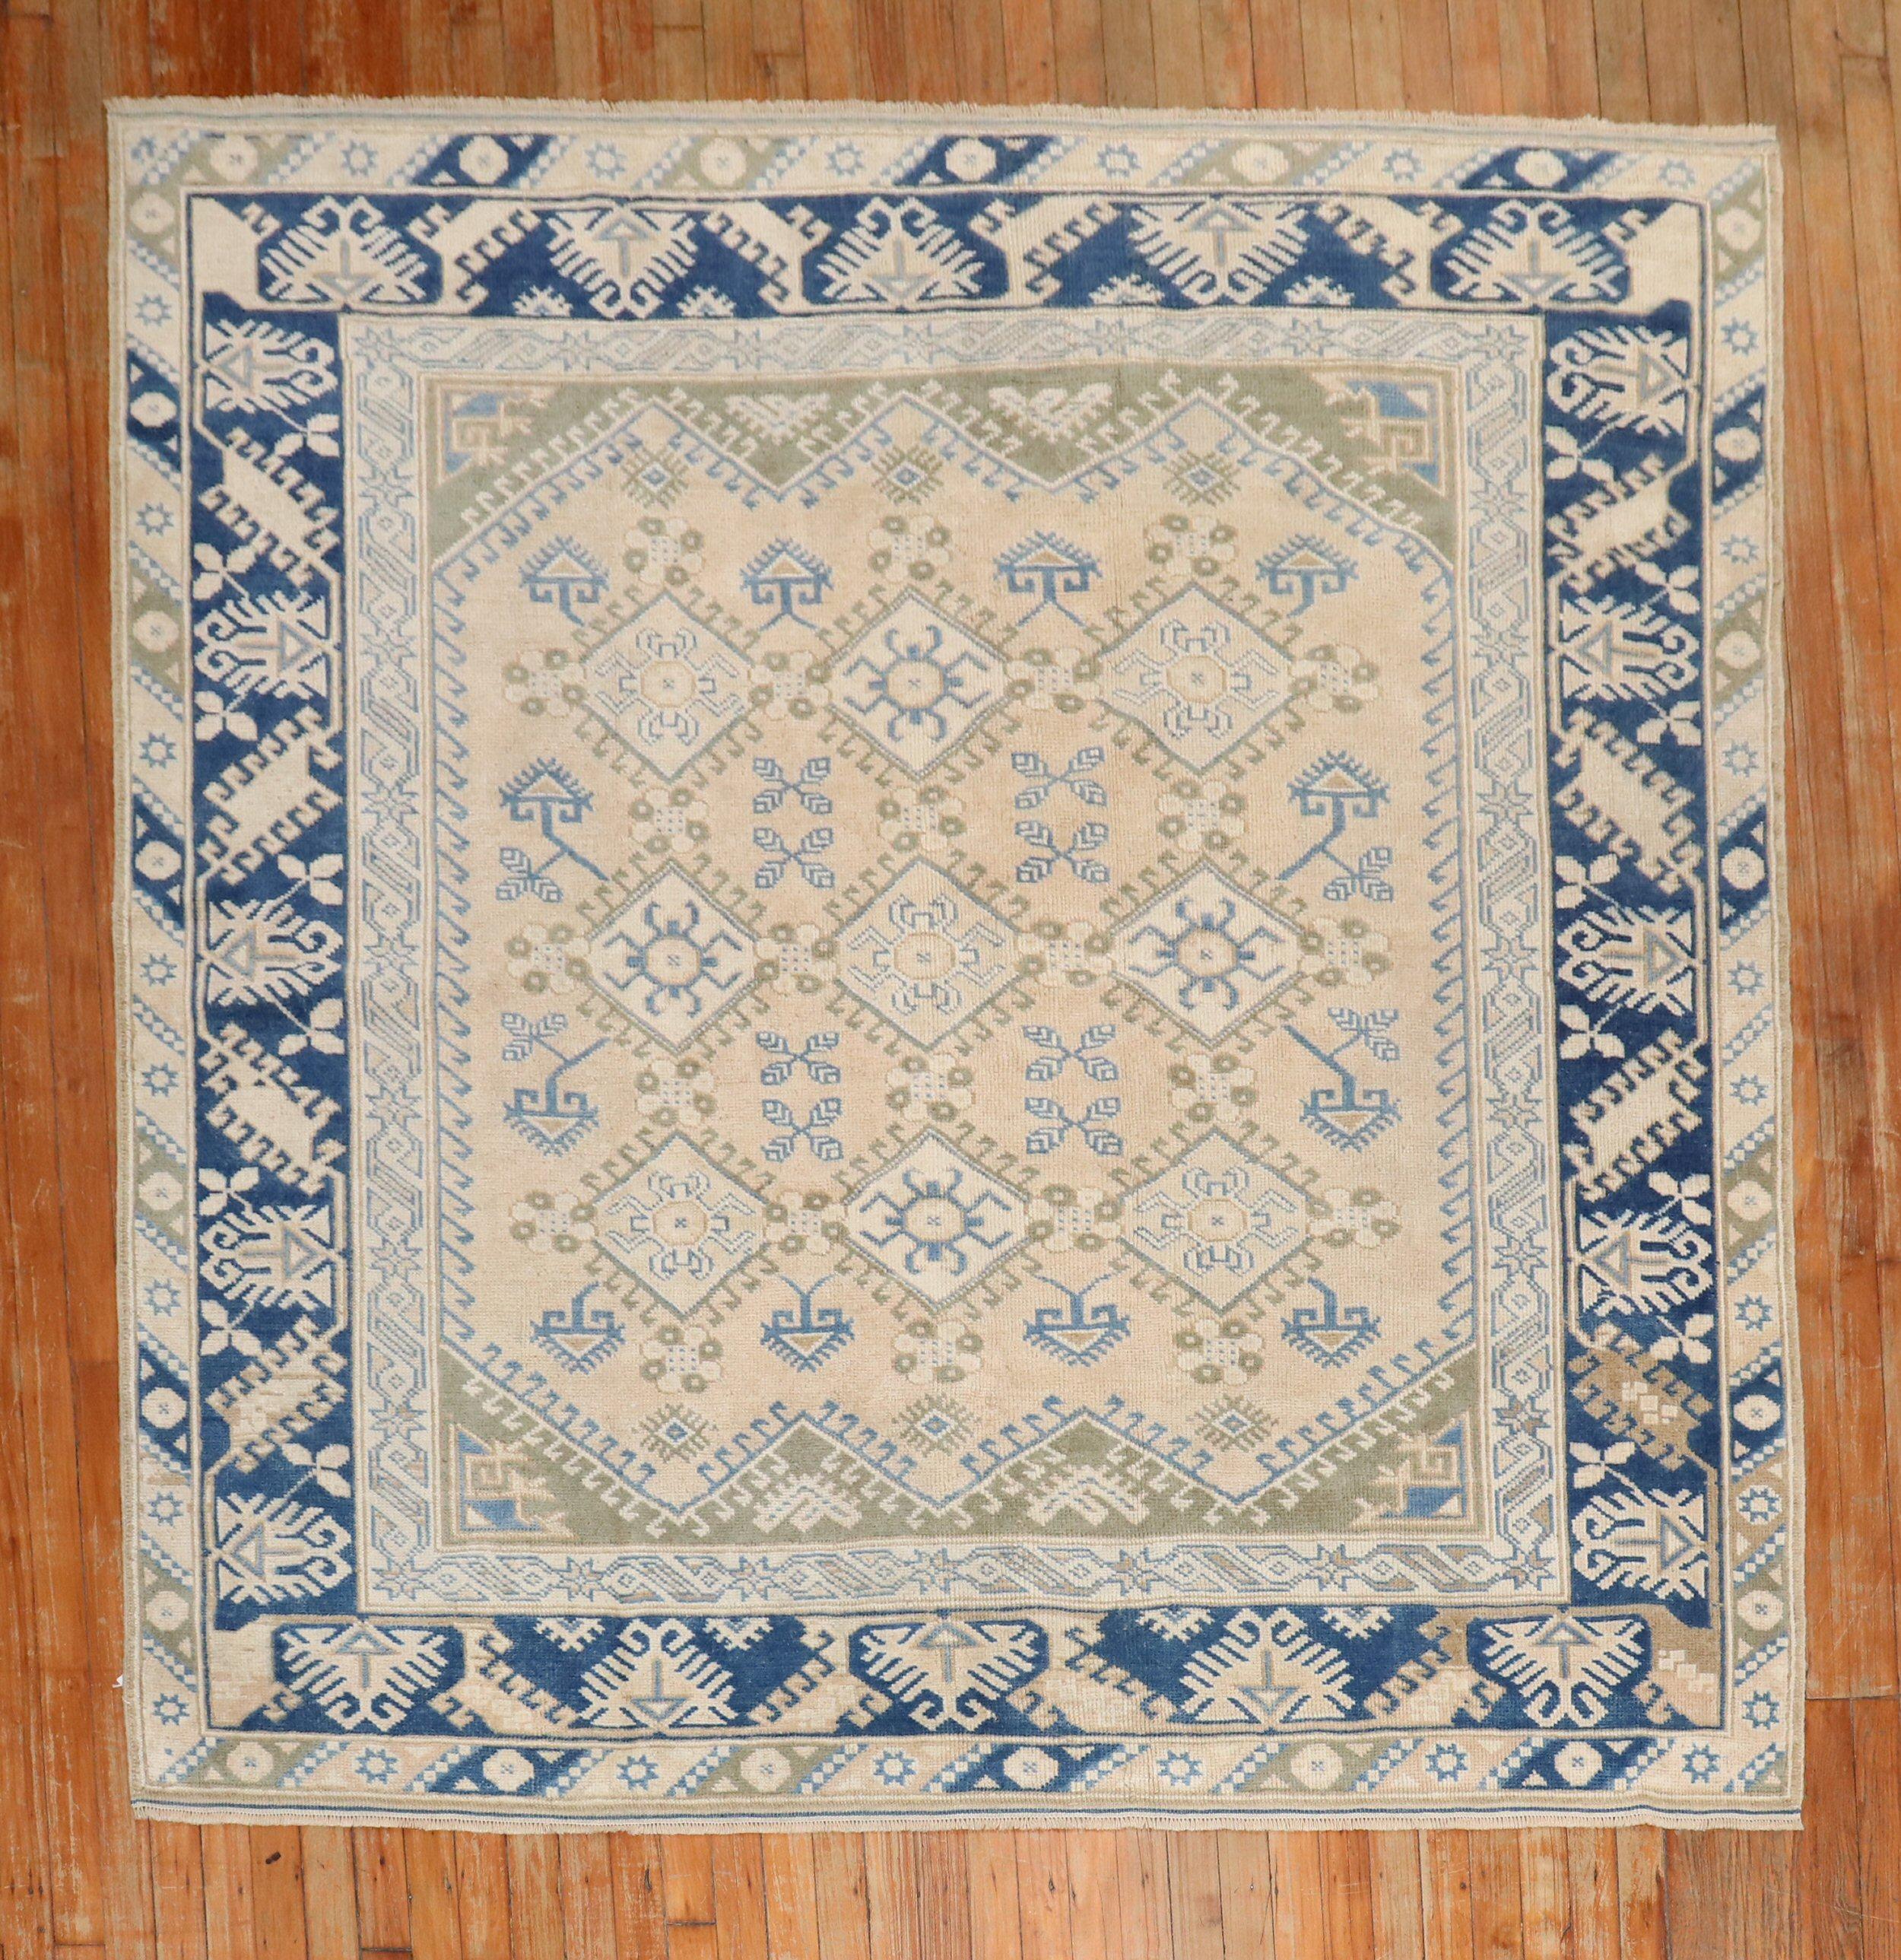 Square size decorative Turkish Anatolian carpet with navy, blue, olive, and brown accents on khaki field

Measures: 6'4'' x 6'6''.